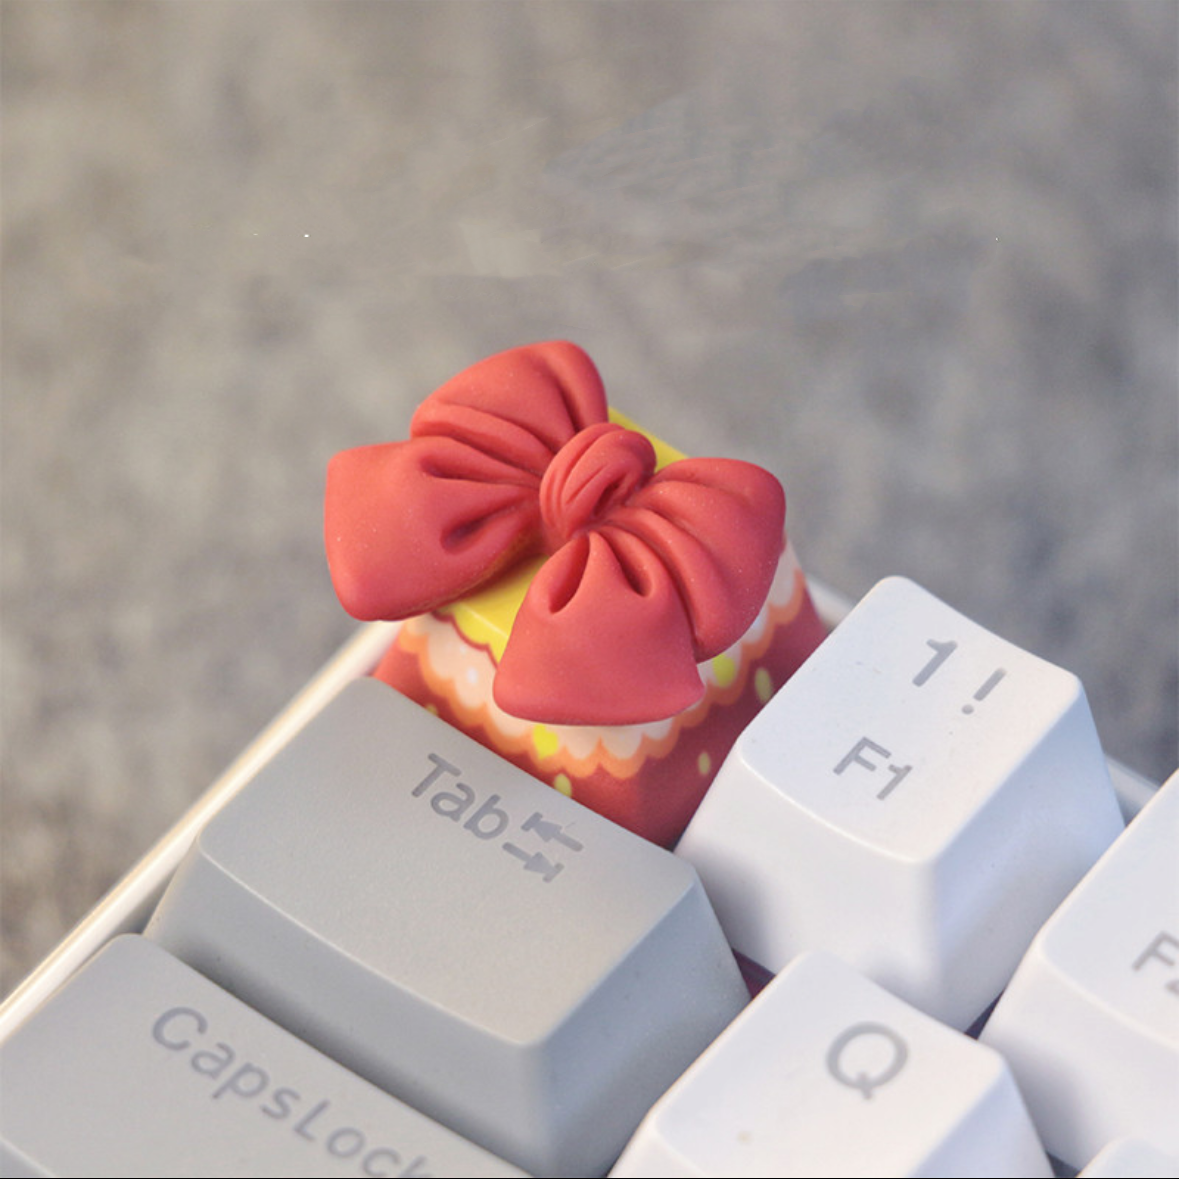 "Elevate your keyboard's style with our unique Bow Tie Custom Artisan Keycaps. Handcrafted with attention to detail, these keycaps are designed to add a touch of elegance to your setup. Each keycap features a bow tie design, making a fashion statement while you type. Stand out from the crowd with these one-of-a-kind artisan keycaps." 🎩💻 #KeyboardAccessories #ArtisanKeycaps #BowTieDesign